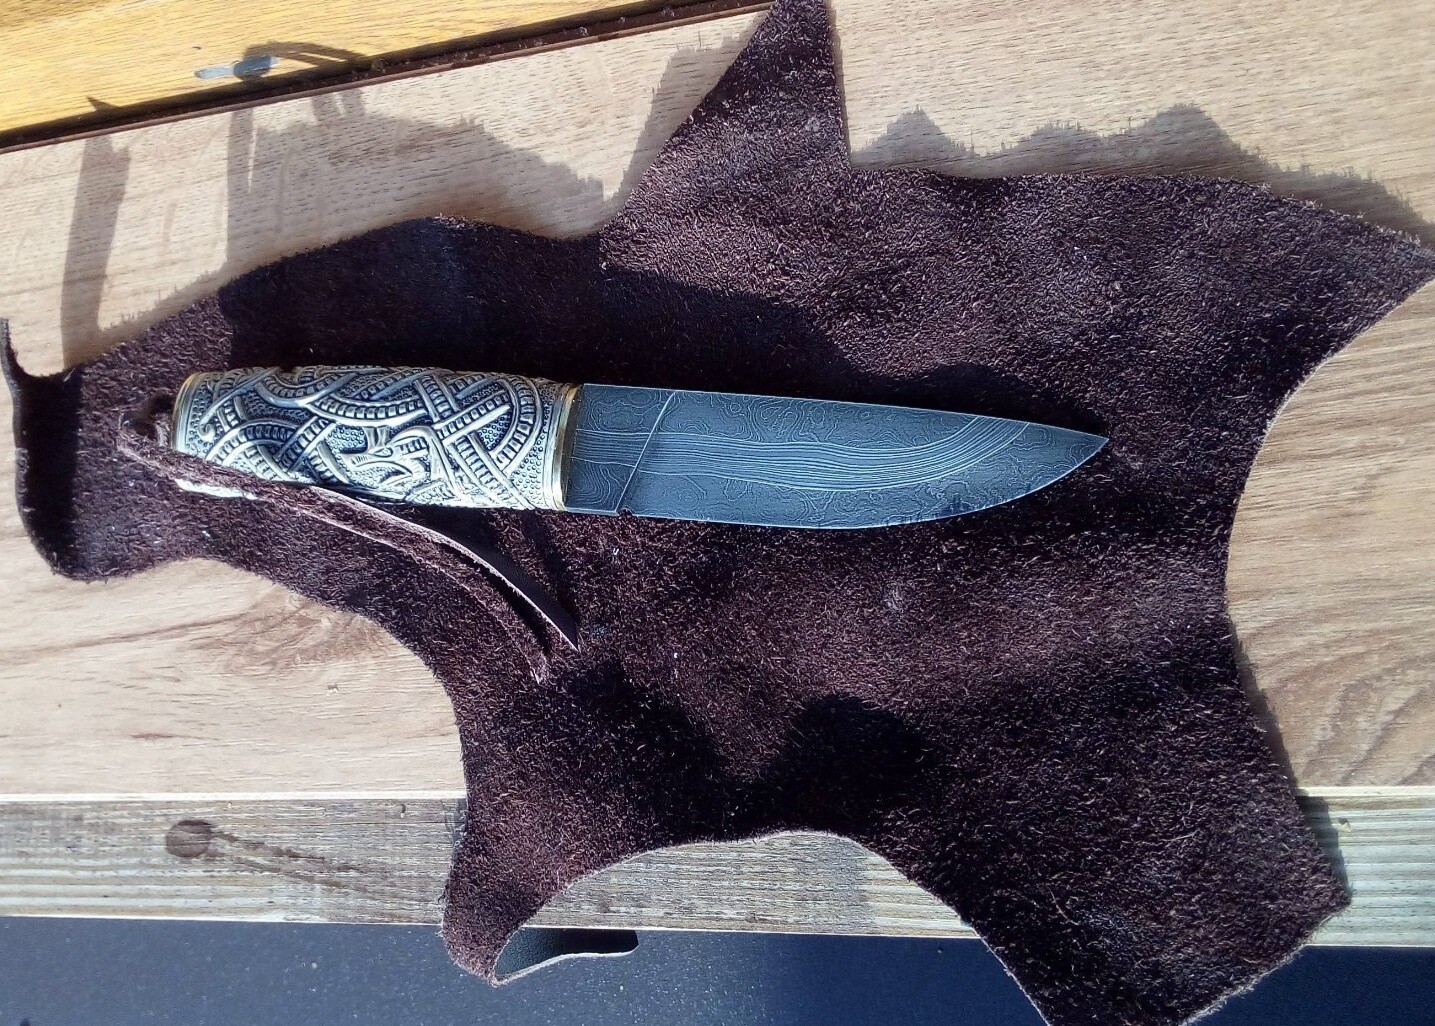 Viking Motifs Hunting Dagger with Antlers Carved Handle (Damascus Steel Hand-forged Blade)